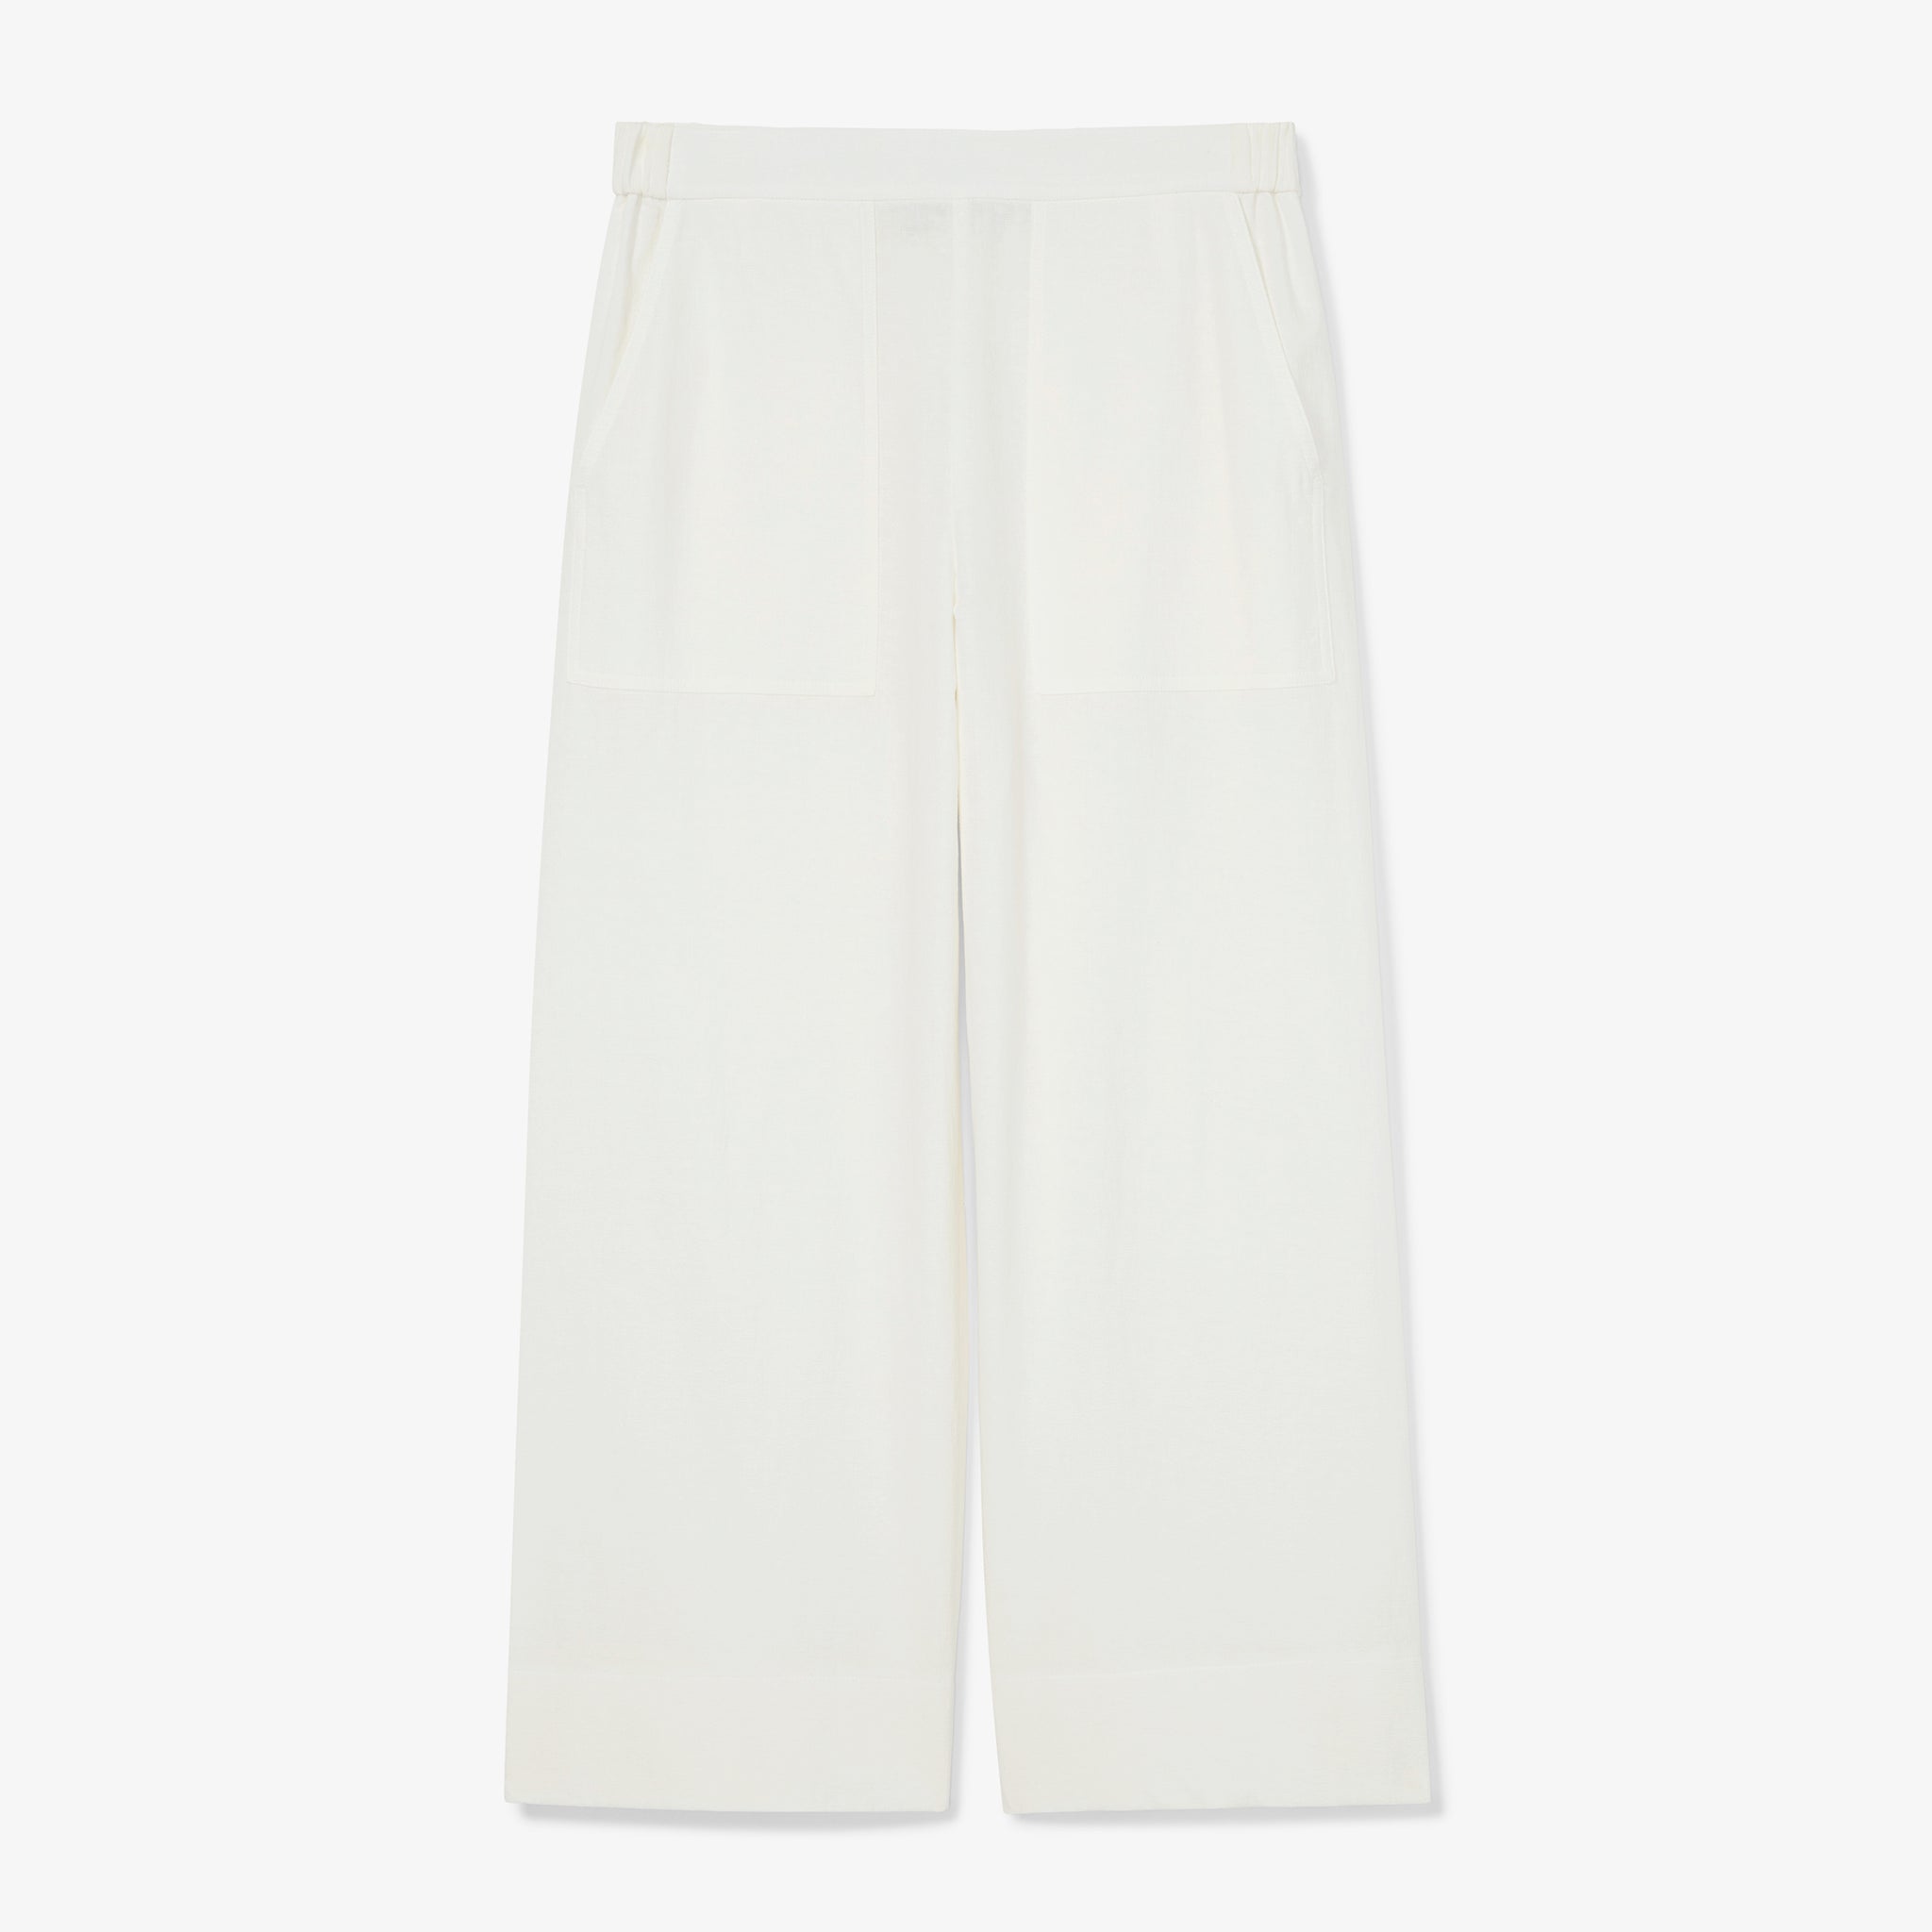 Packshot image of the Madelyn Pant in Ivory